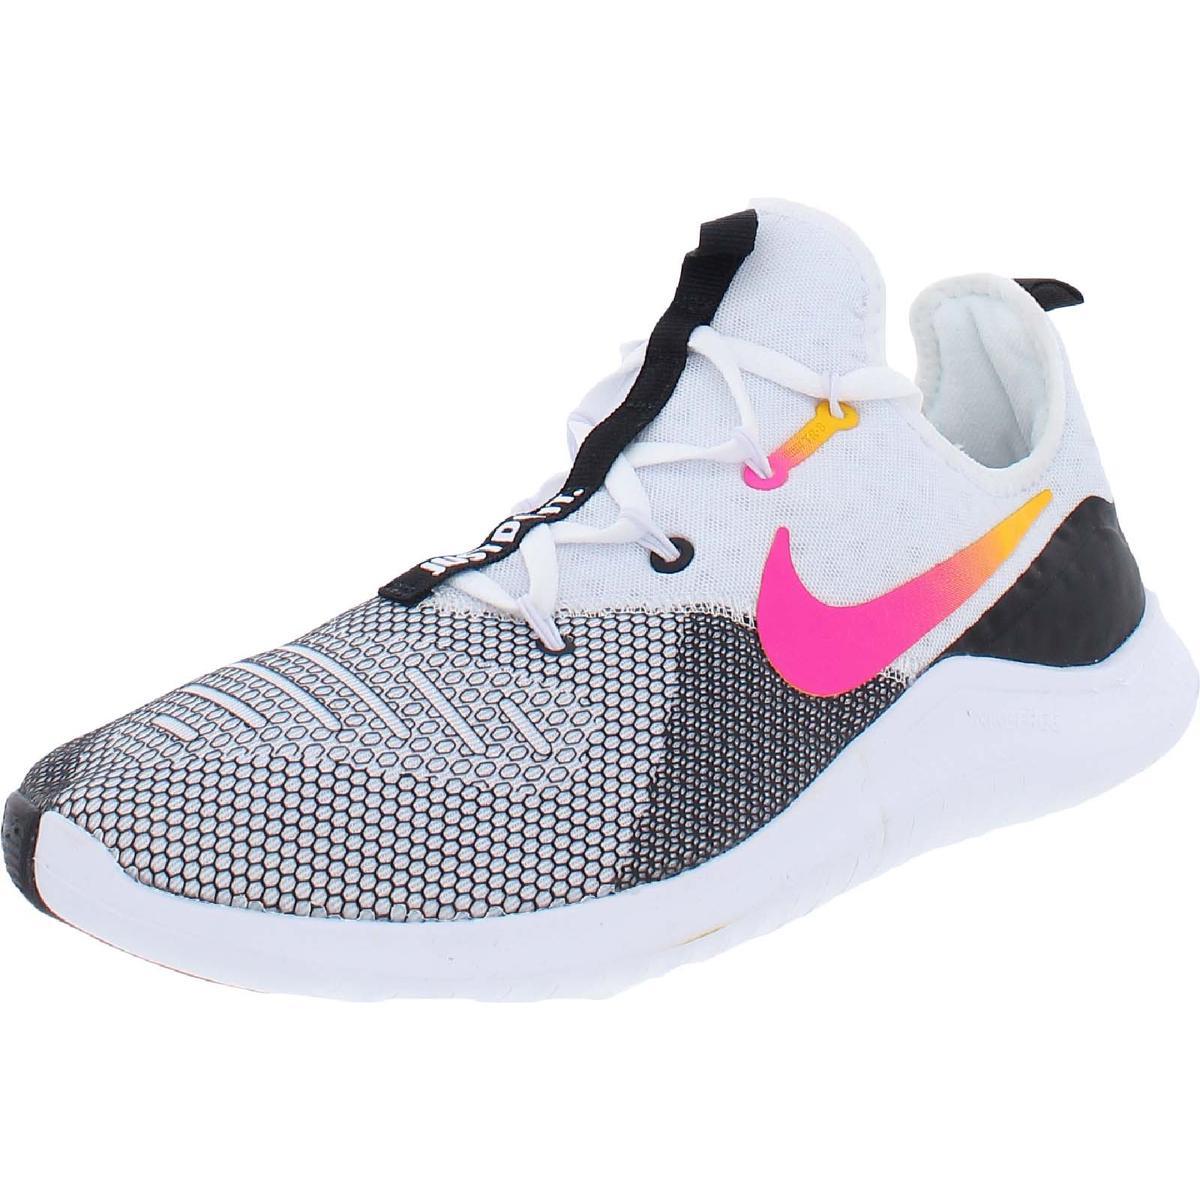 Nike Womens Free TR 8 Athletic Trainer Workout Running Shoes Sneakers Bhfo 5207 White/Black/Pink Burst